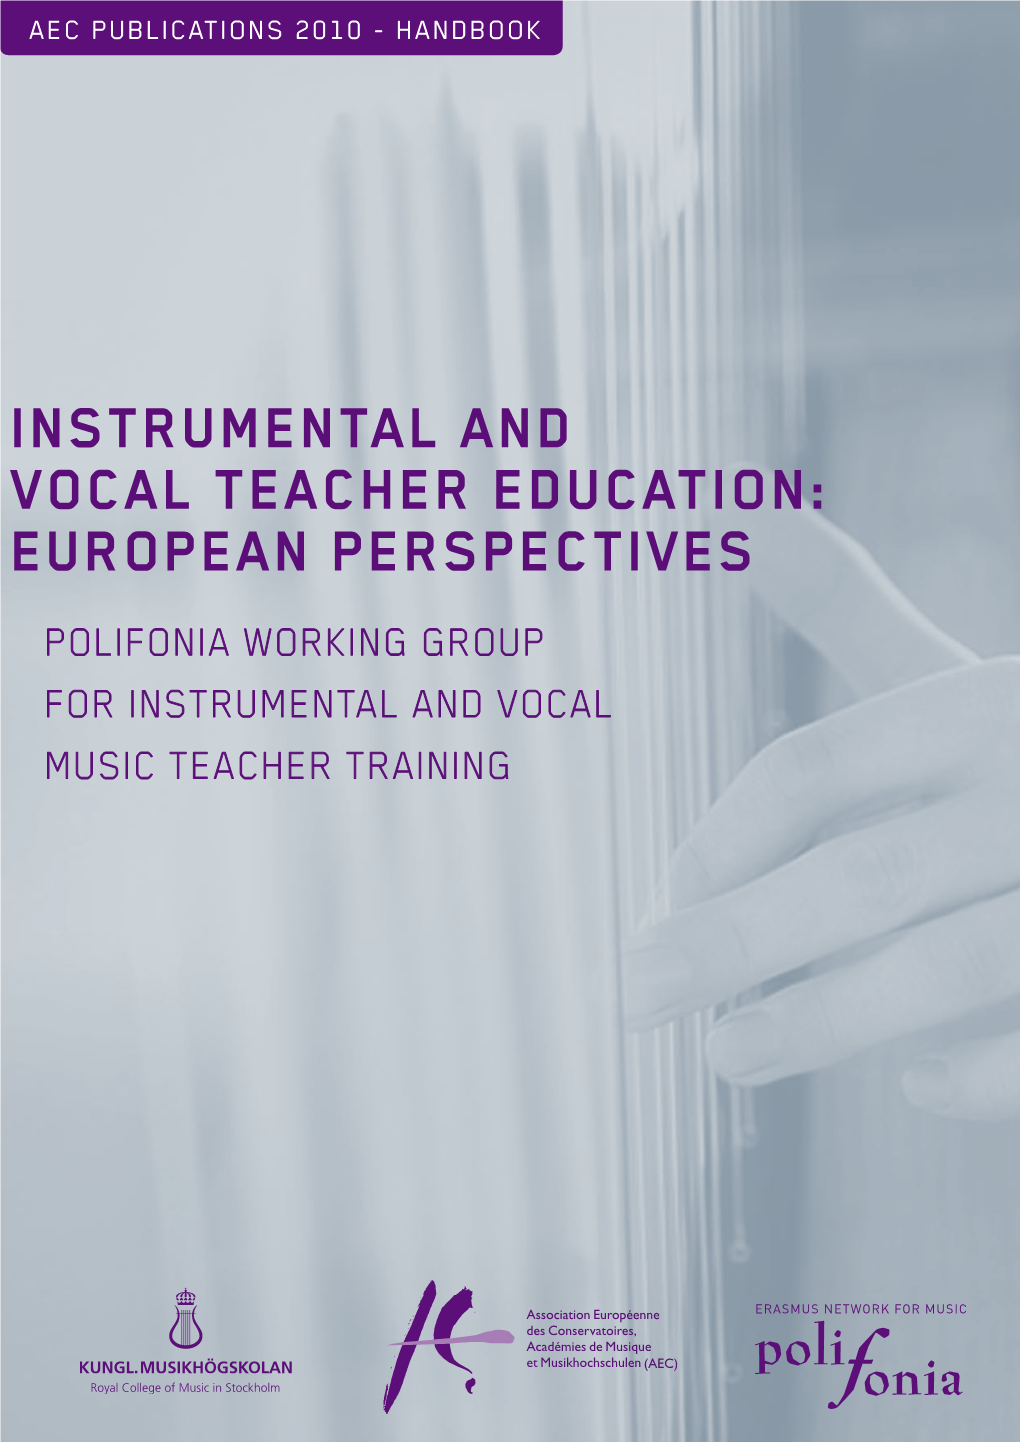 Instrumental and Vocal Teacher Education: European Perspectives Polifonia Working Group for Instrumental and Vocal Music Teacher Training